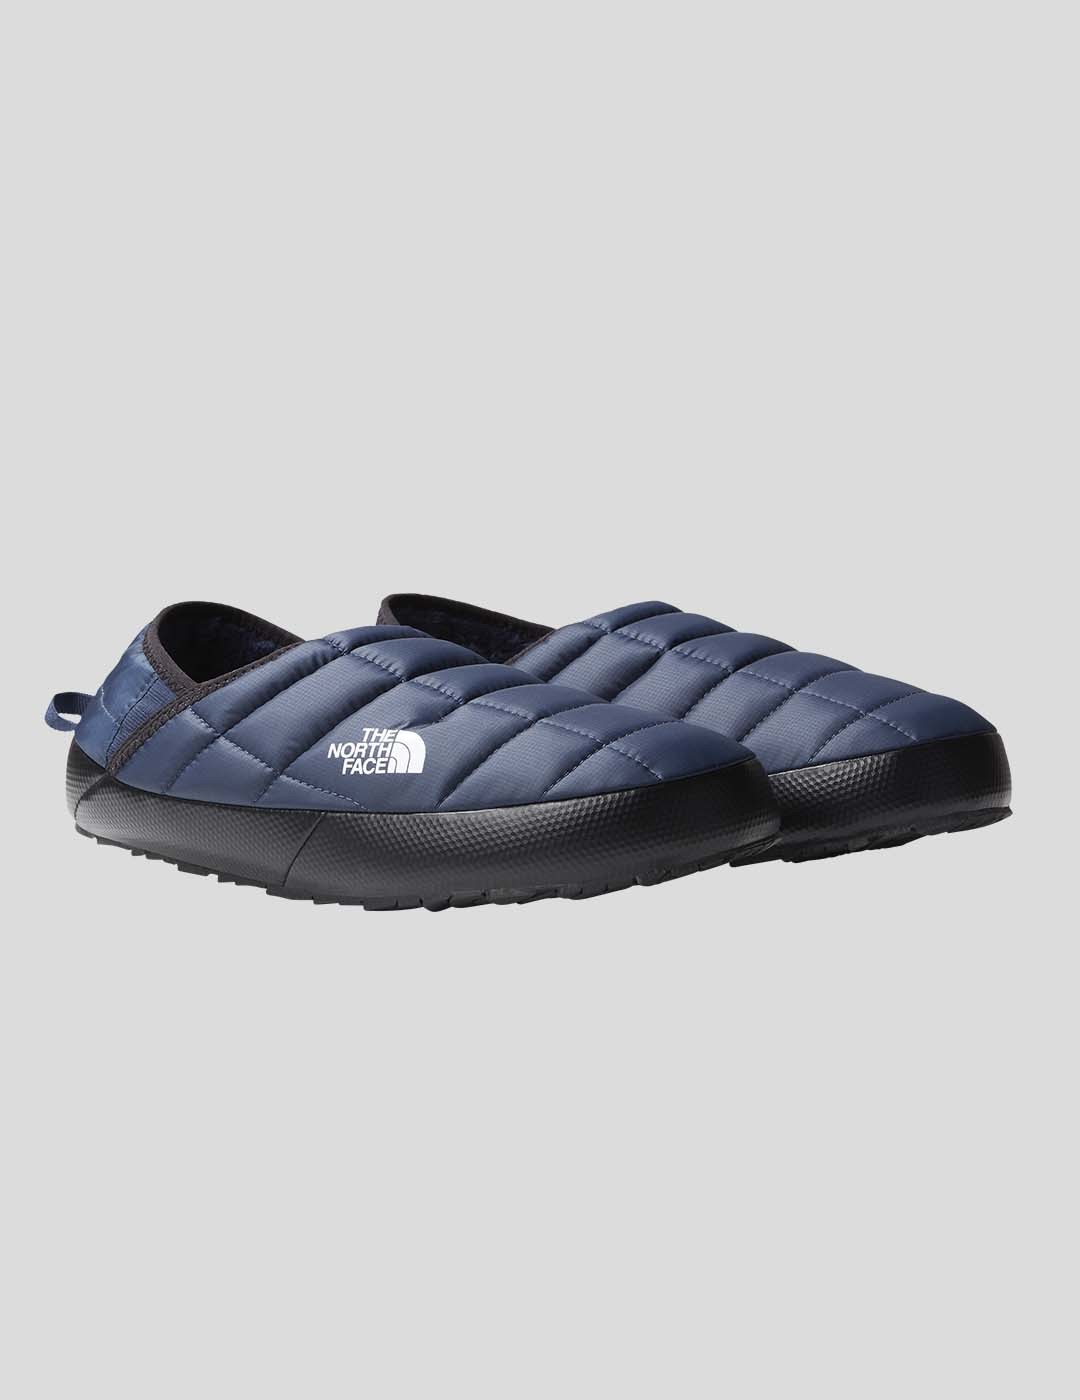 ZAPATILLAS THE NORTH FACE THERMOBALL TRACTION MULE V  SUMMIT NAVY/TNF BLACK